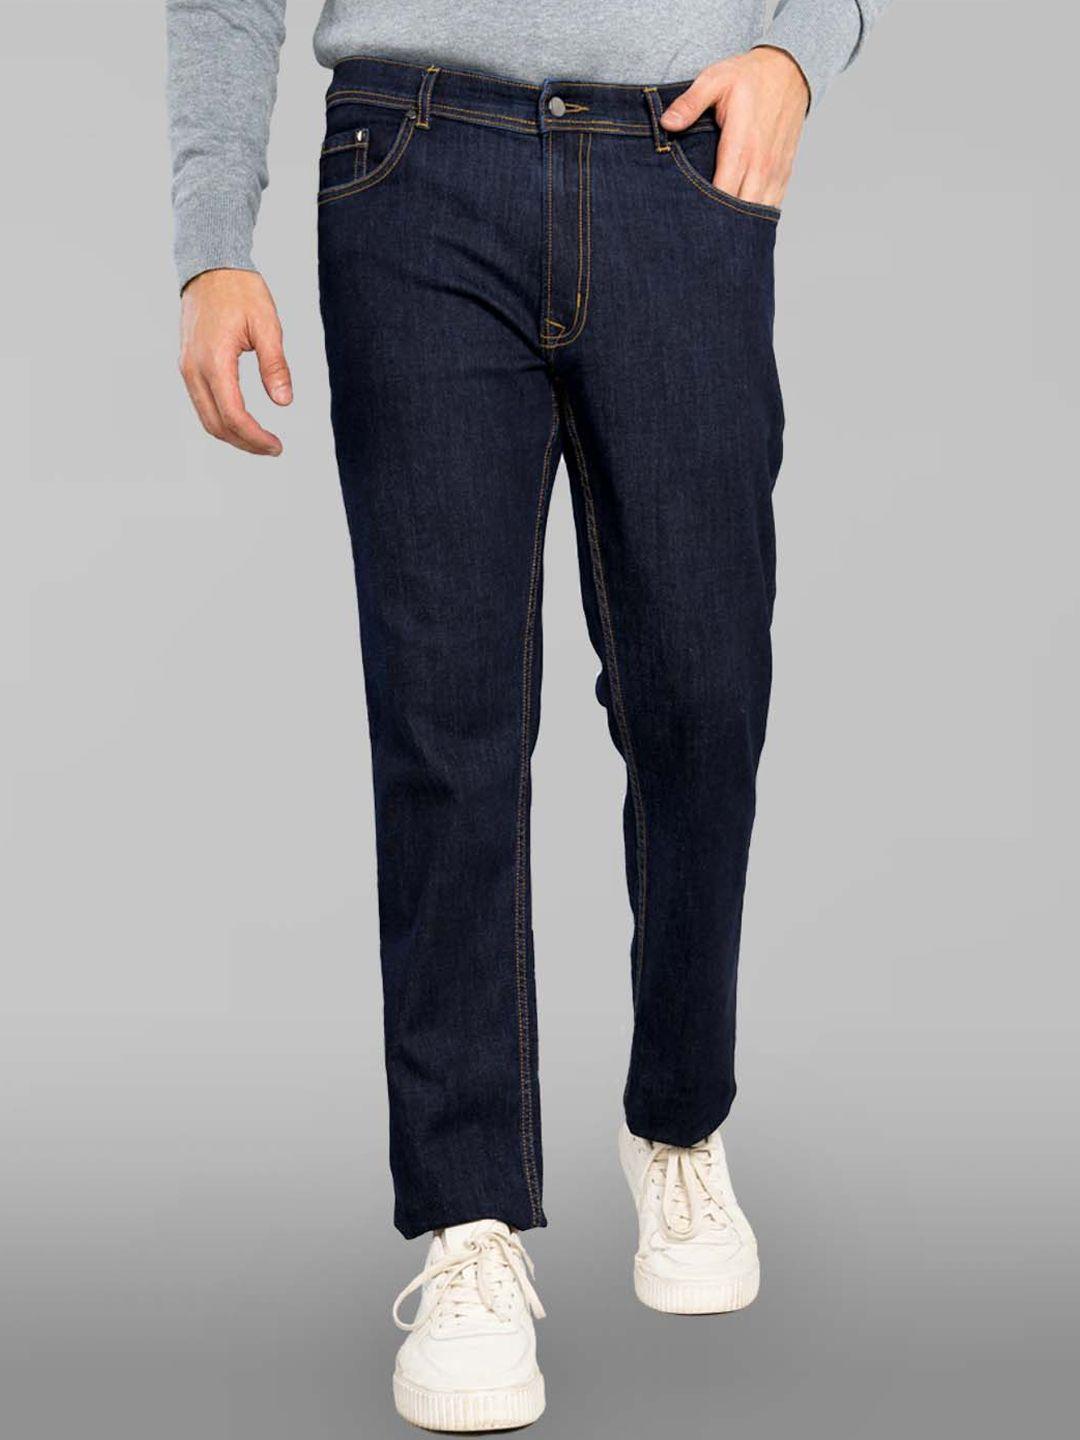 the pant project men tailored slim fit wrinkle free trousers